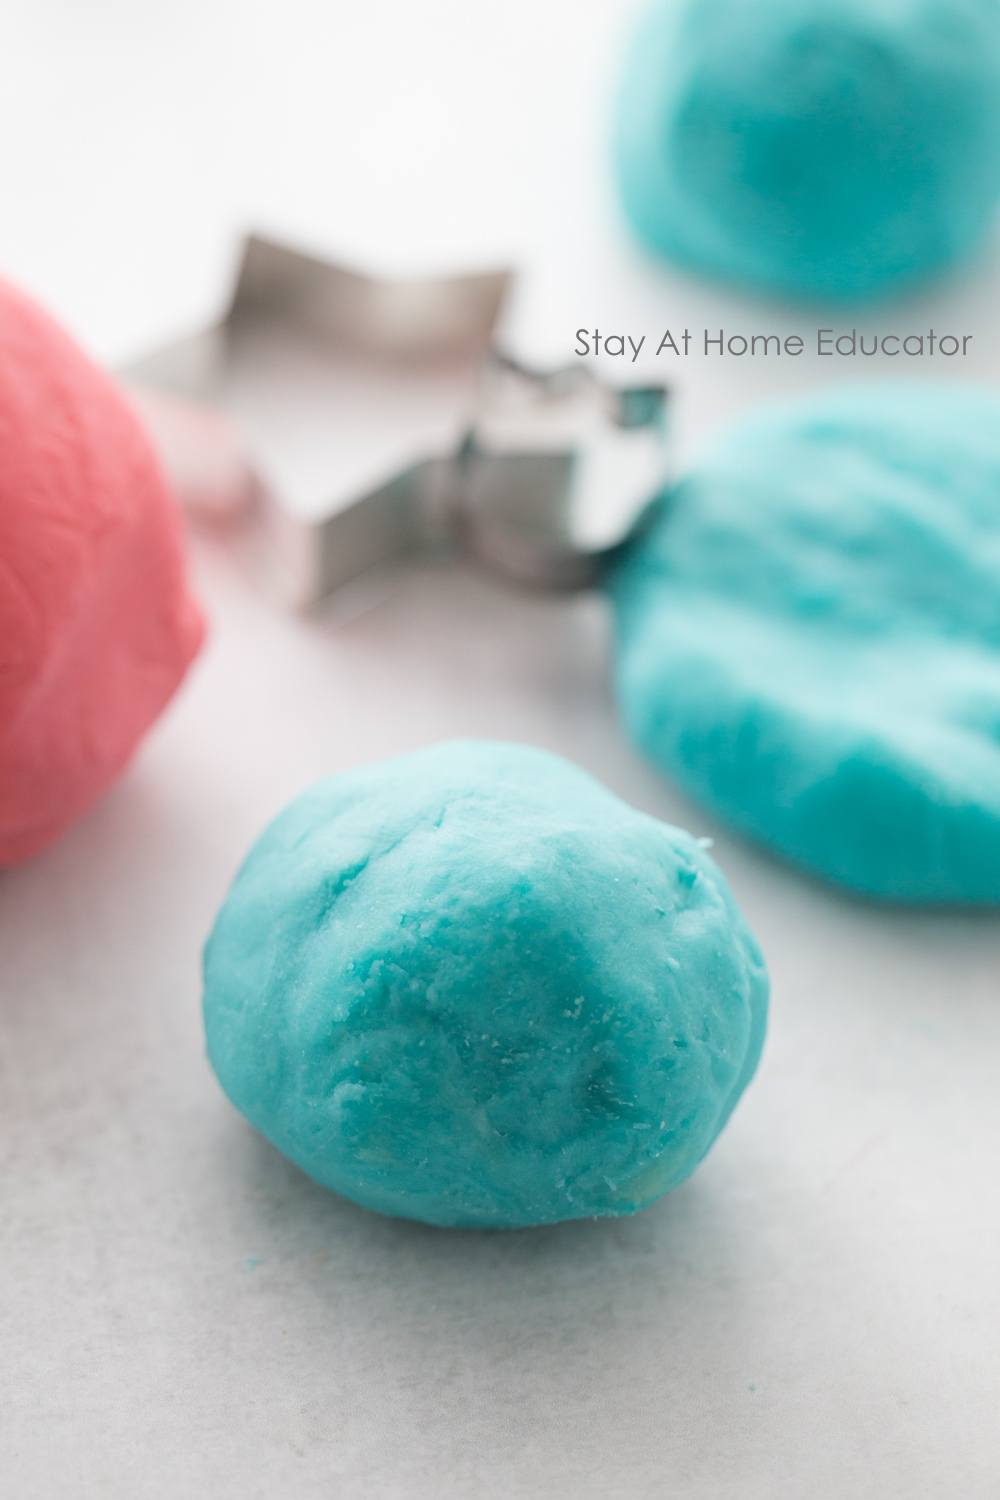 Learn how to make the softest play dough recipe without cream of tartar | Super soft play dough recipe without cream of tartar | corn starch playdough recipe | homemade playdough with cornstarch | soft play dough recipe | how to make playdough with cornstarch